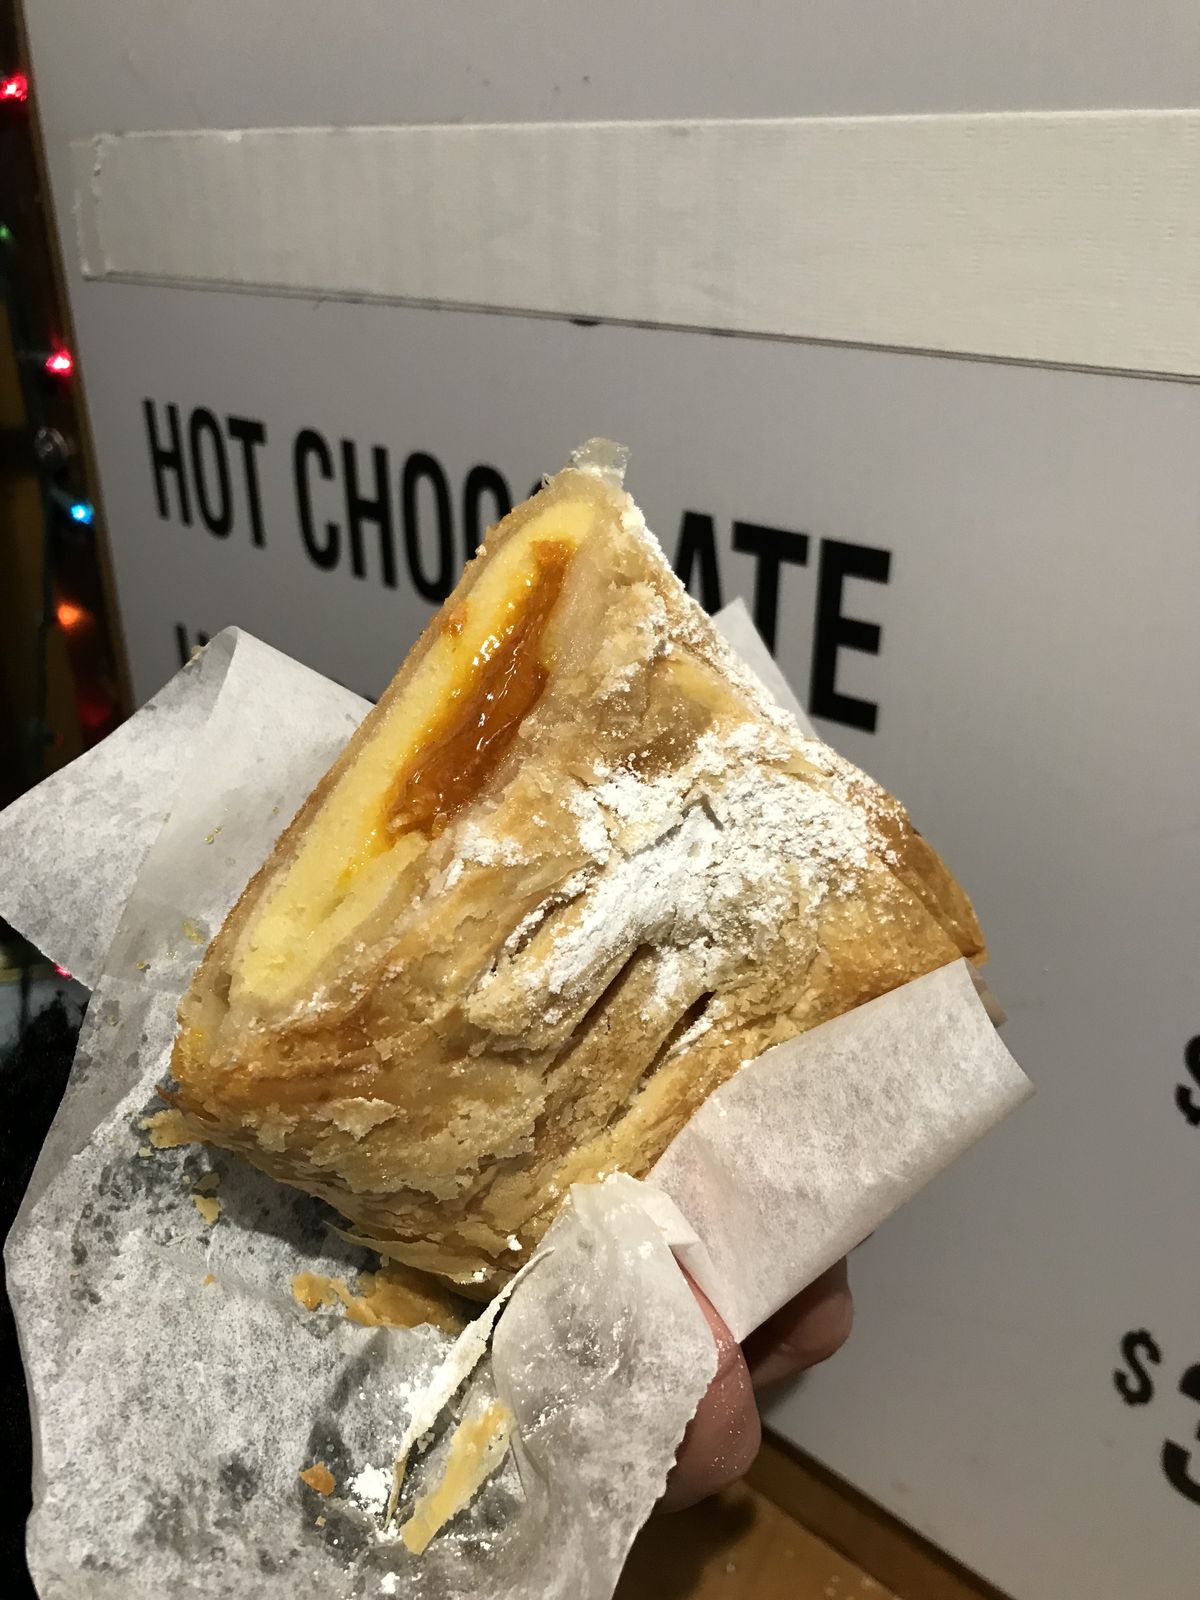 A handle holding a strudel.